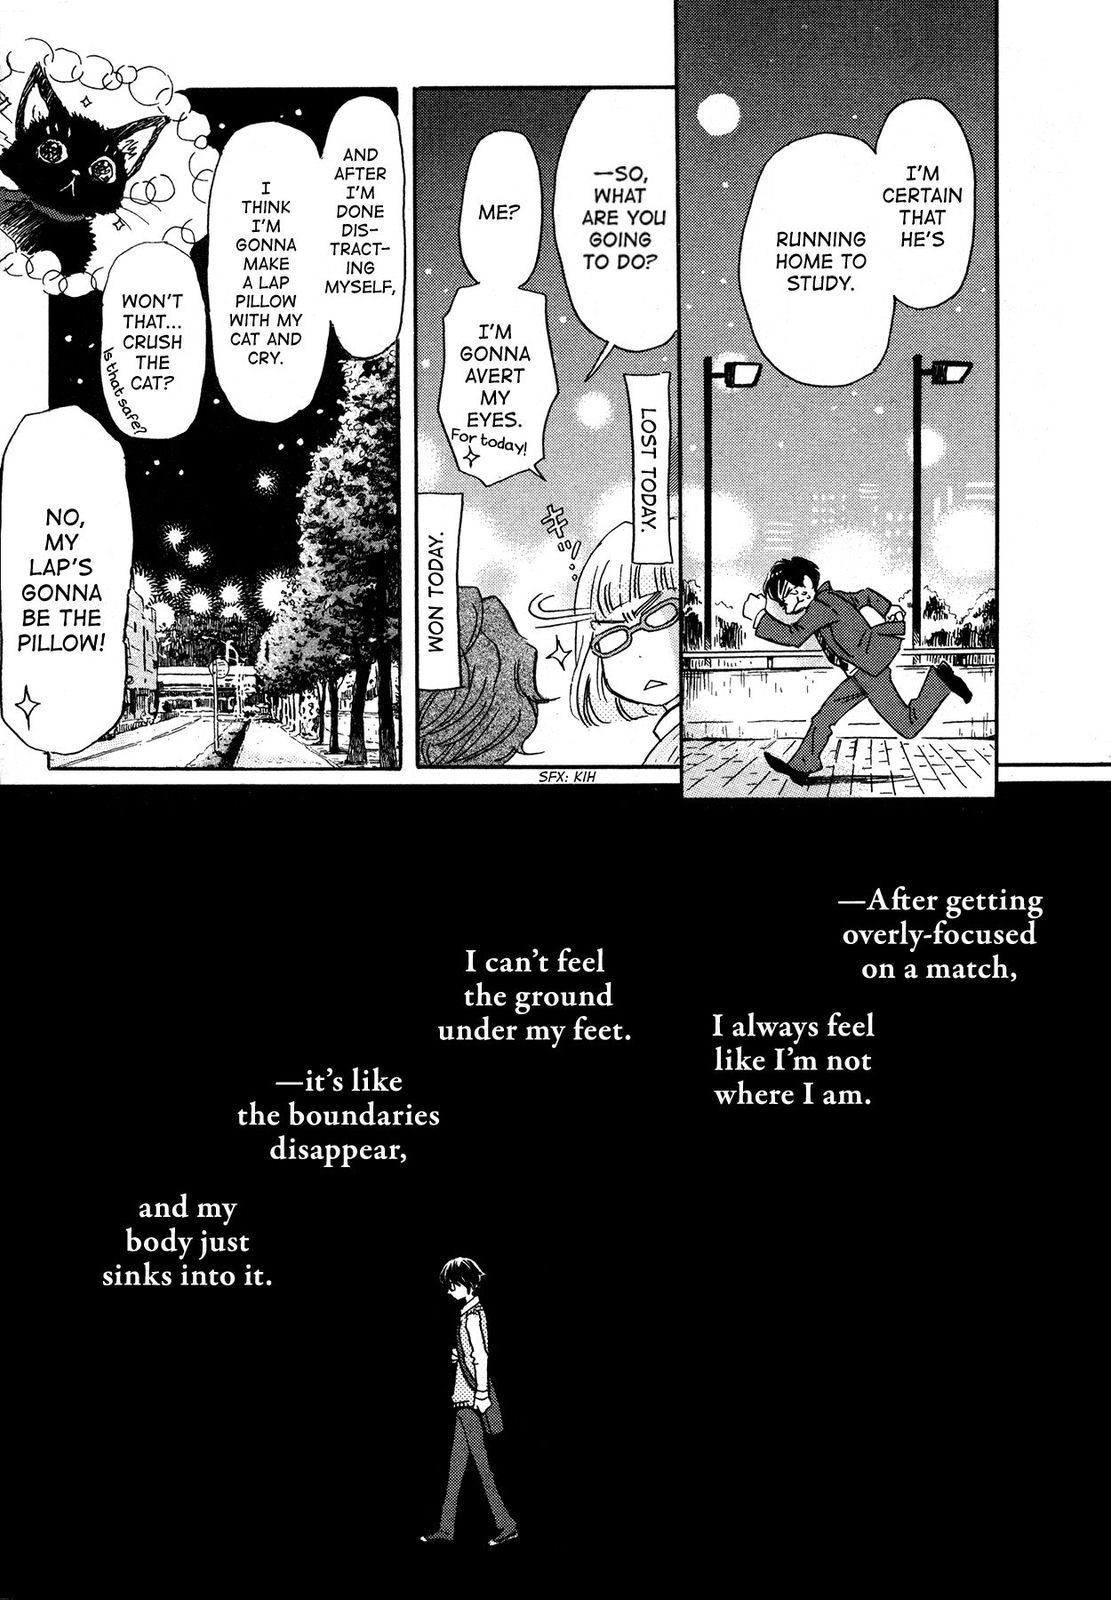 March Comes in Like a Lion, Chapter 160 Azusa Number 1 (Part 5) (EN) image 14